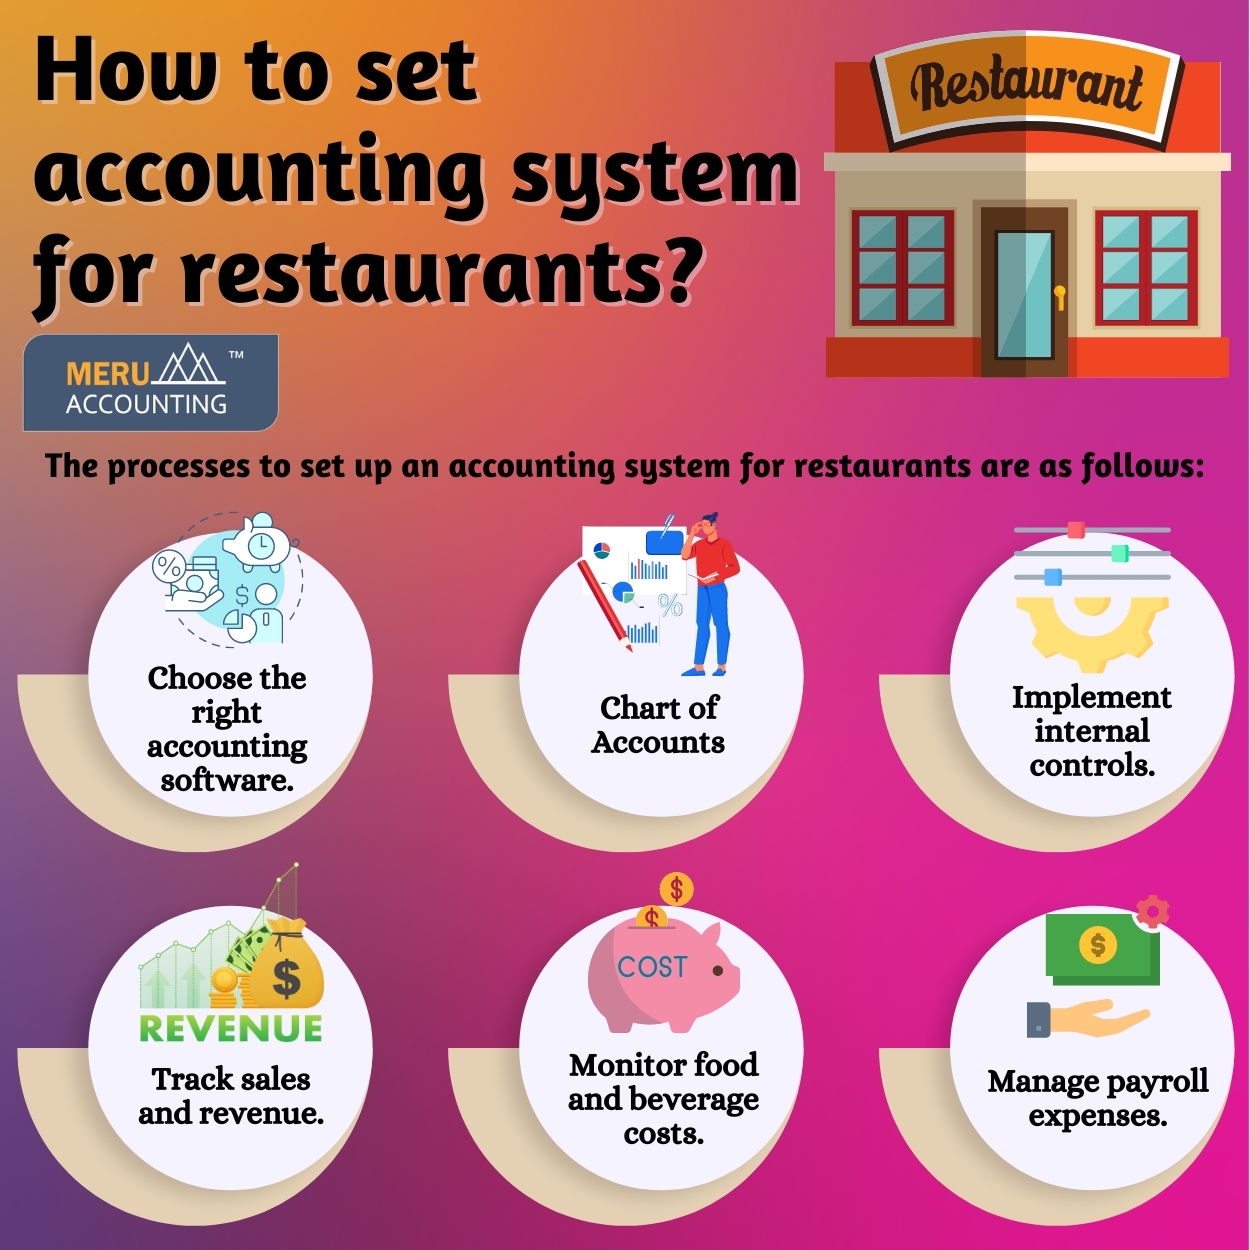 How to set accounting system for restaurants 1250 by 1250 v1